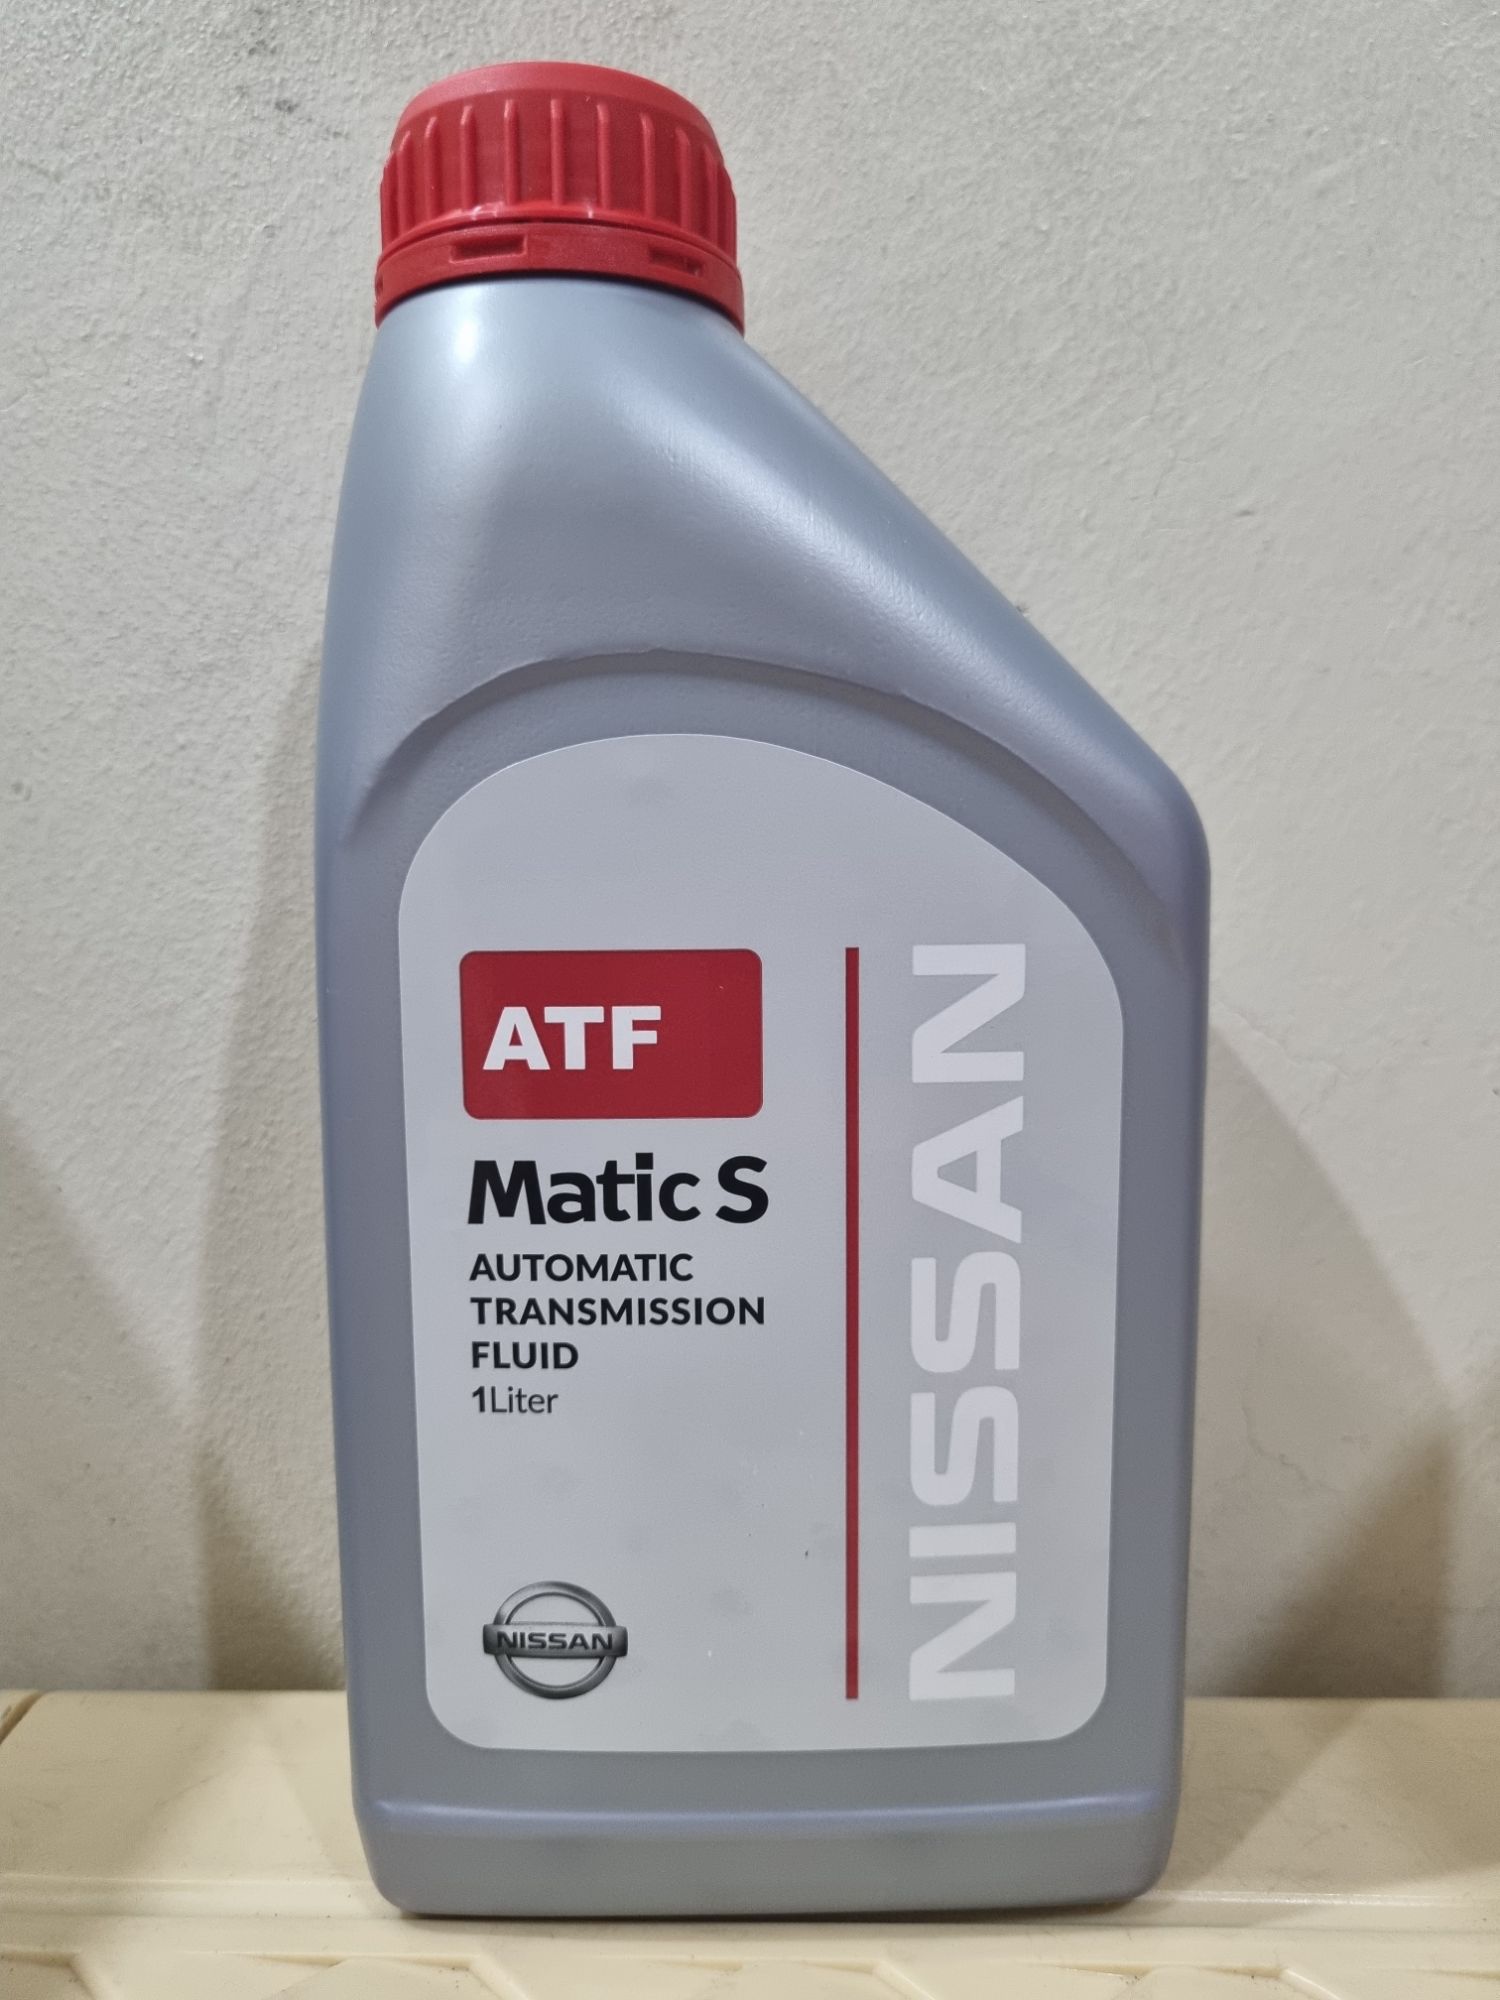 Nissan matic d atf. Nissan ATF matic-s. Nissan Automatic transmission Fluid matic-s. Ниссан матик j. АКПП Nissan matic d4 масло.